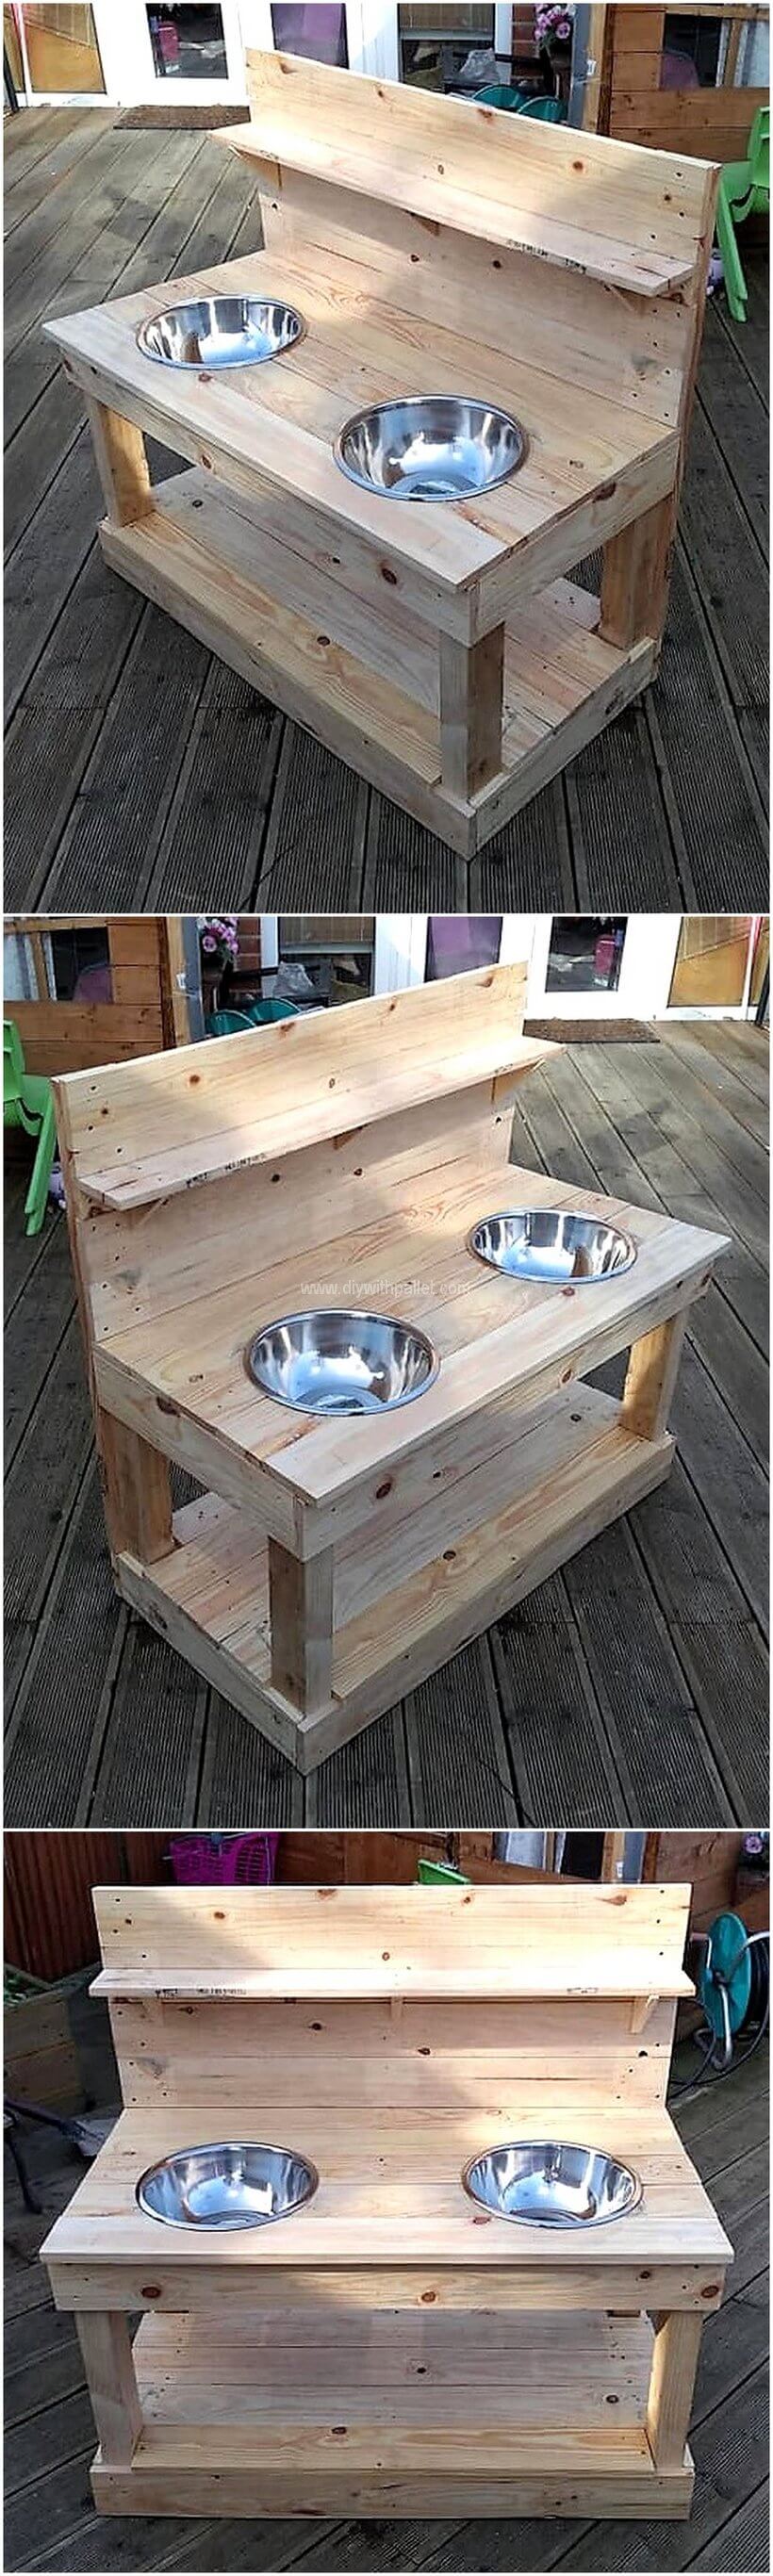 kids mud kitchen out of pallets